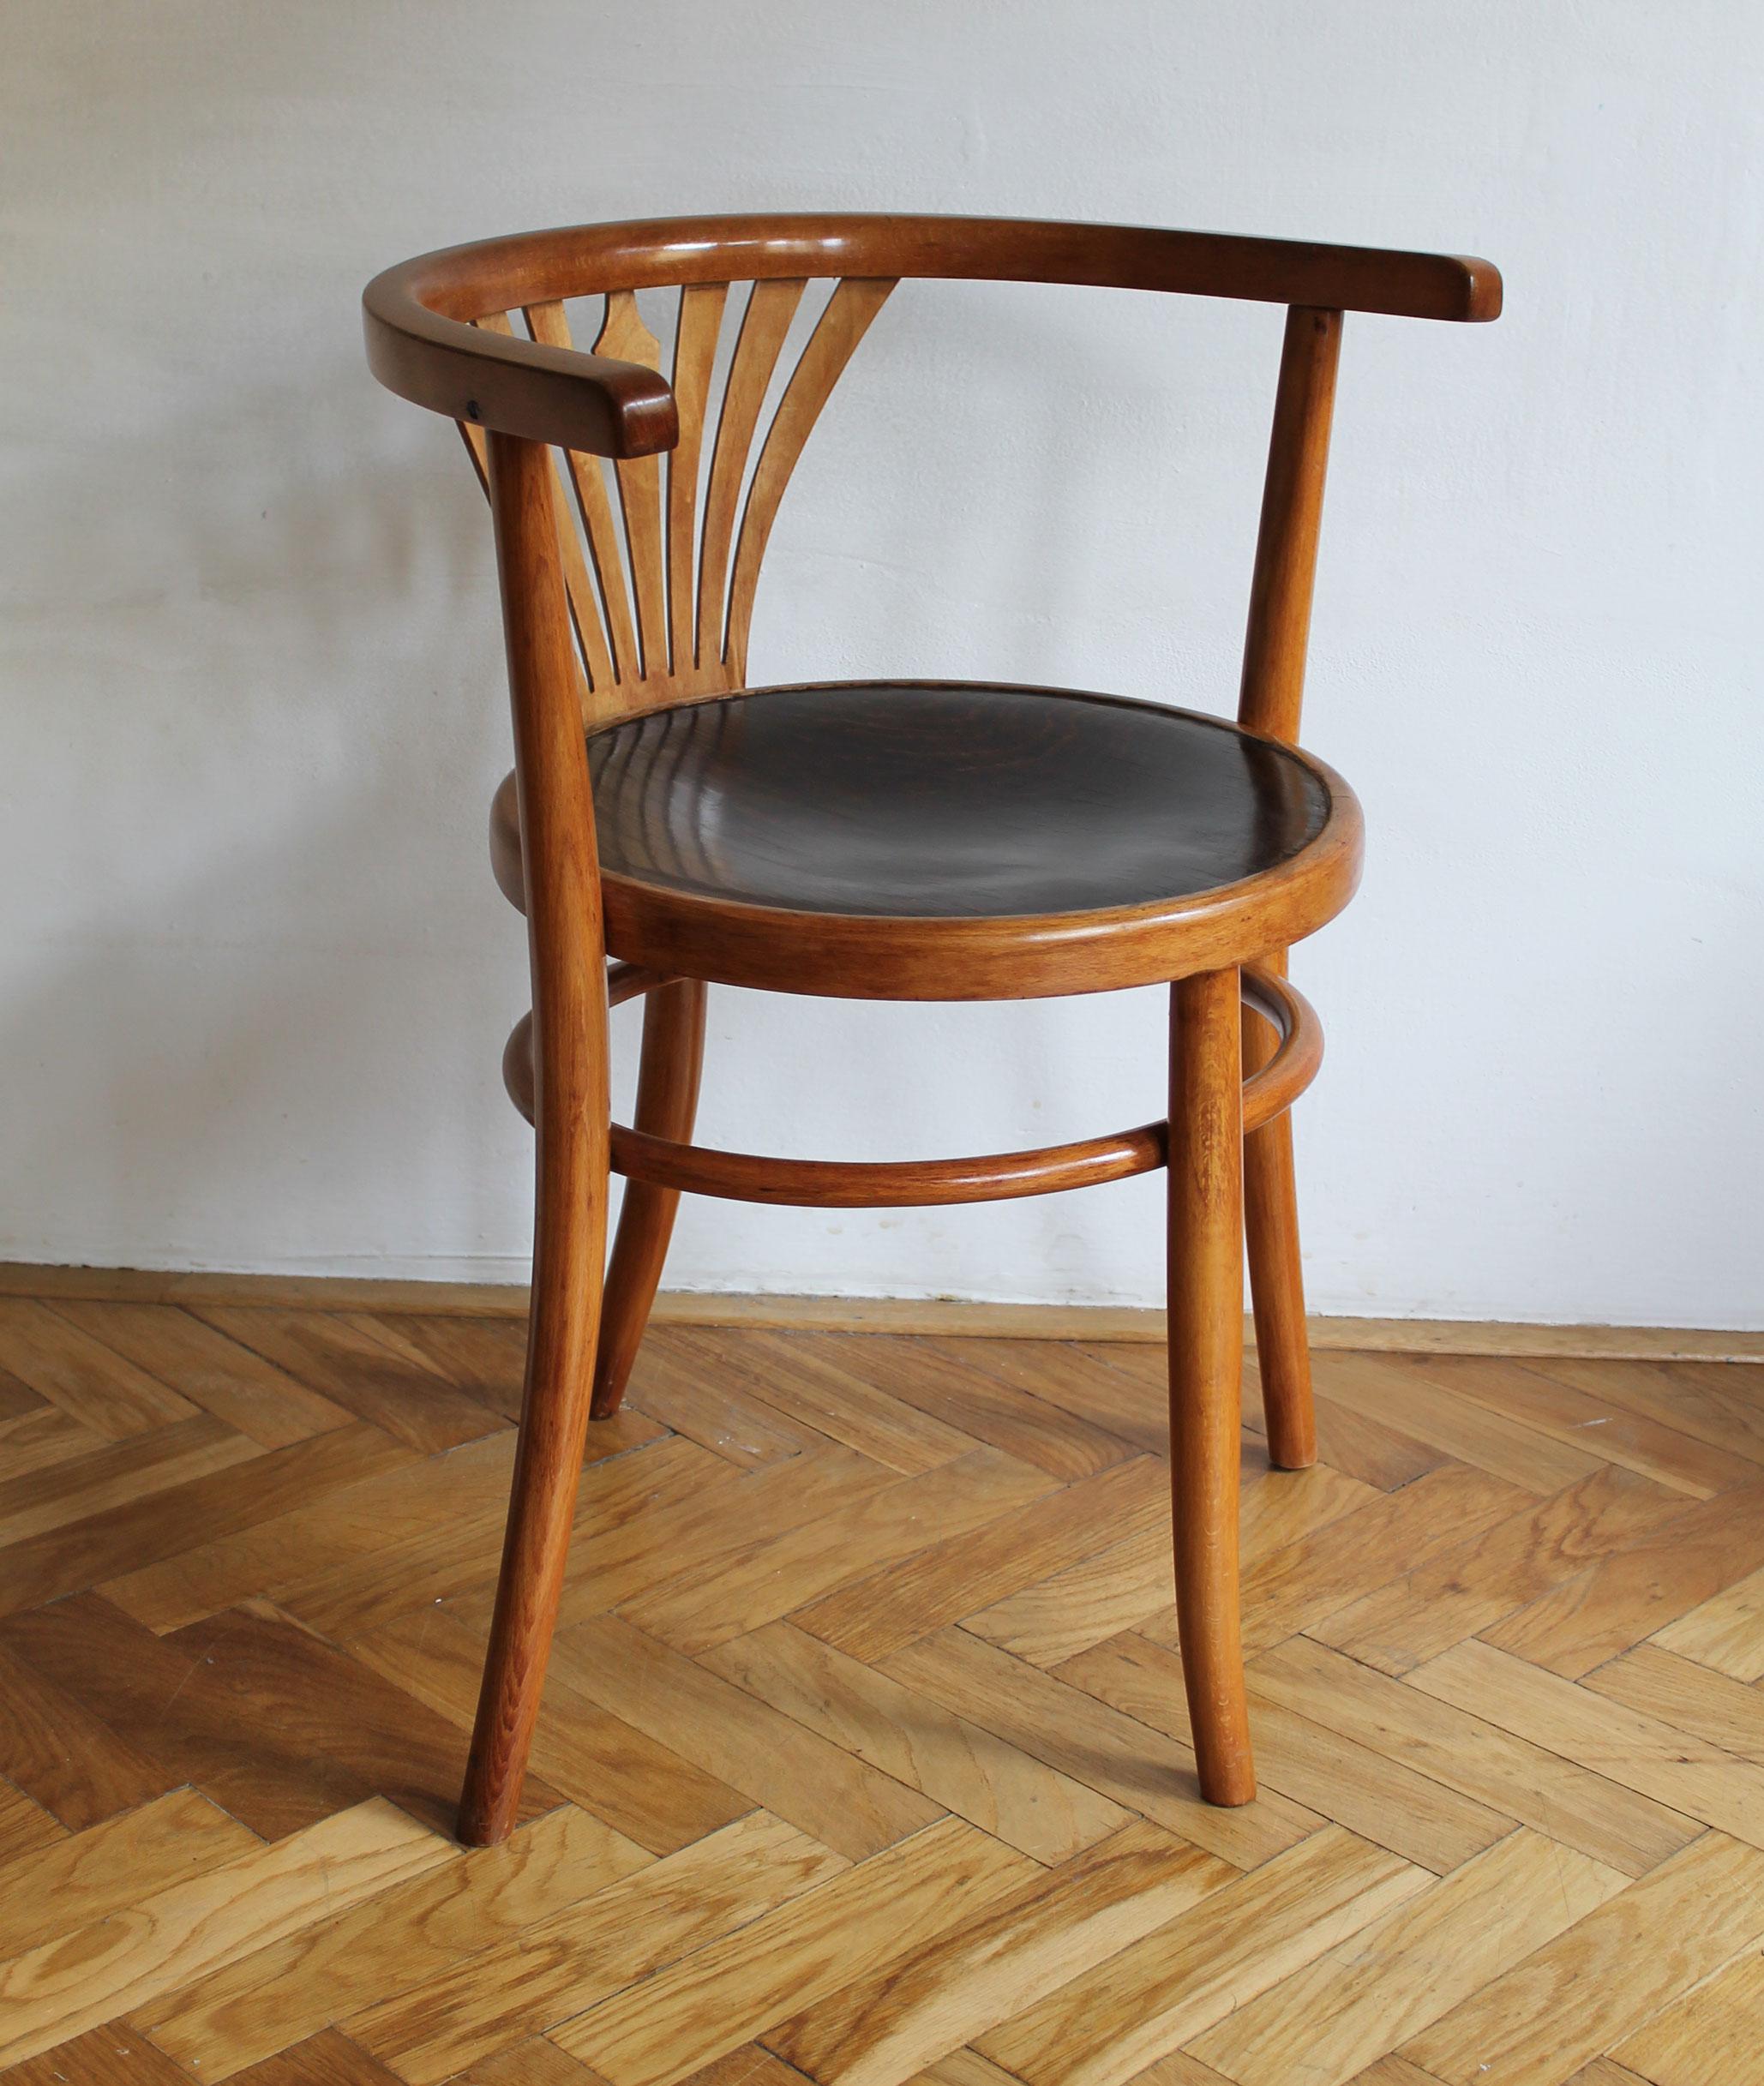 These dining chair were originally designed by the Thonet company in 1904, as model No. 28. This particular model is believed to be made by Thonet in one of their factories in former Czechoslovakia around 1926.

This piece has got an interesting